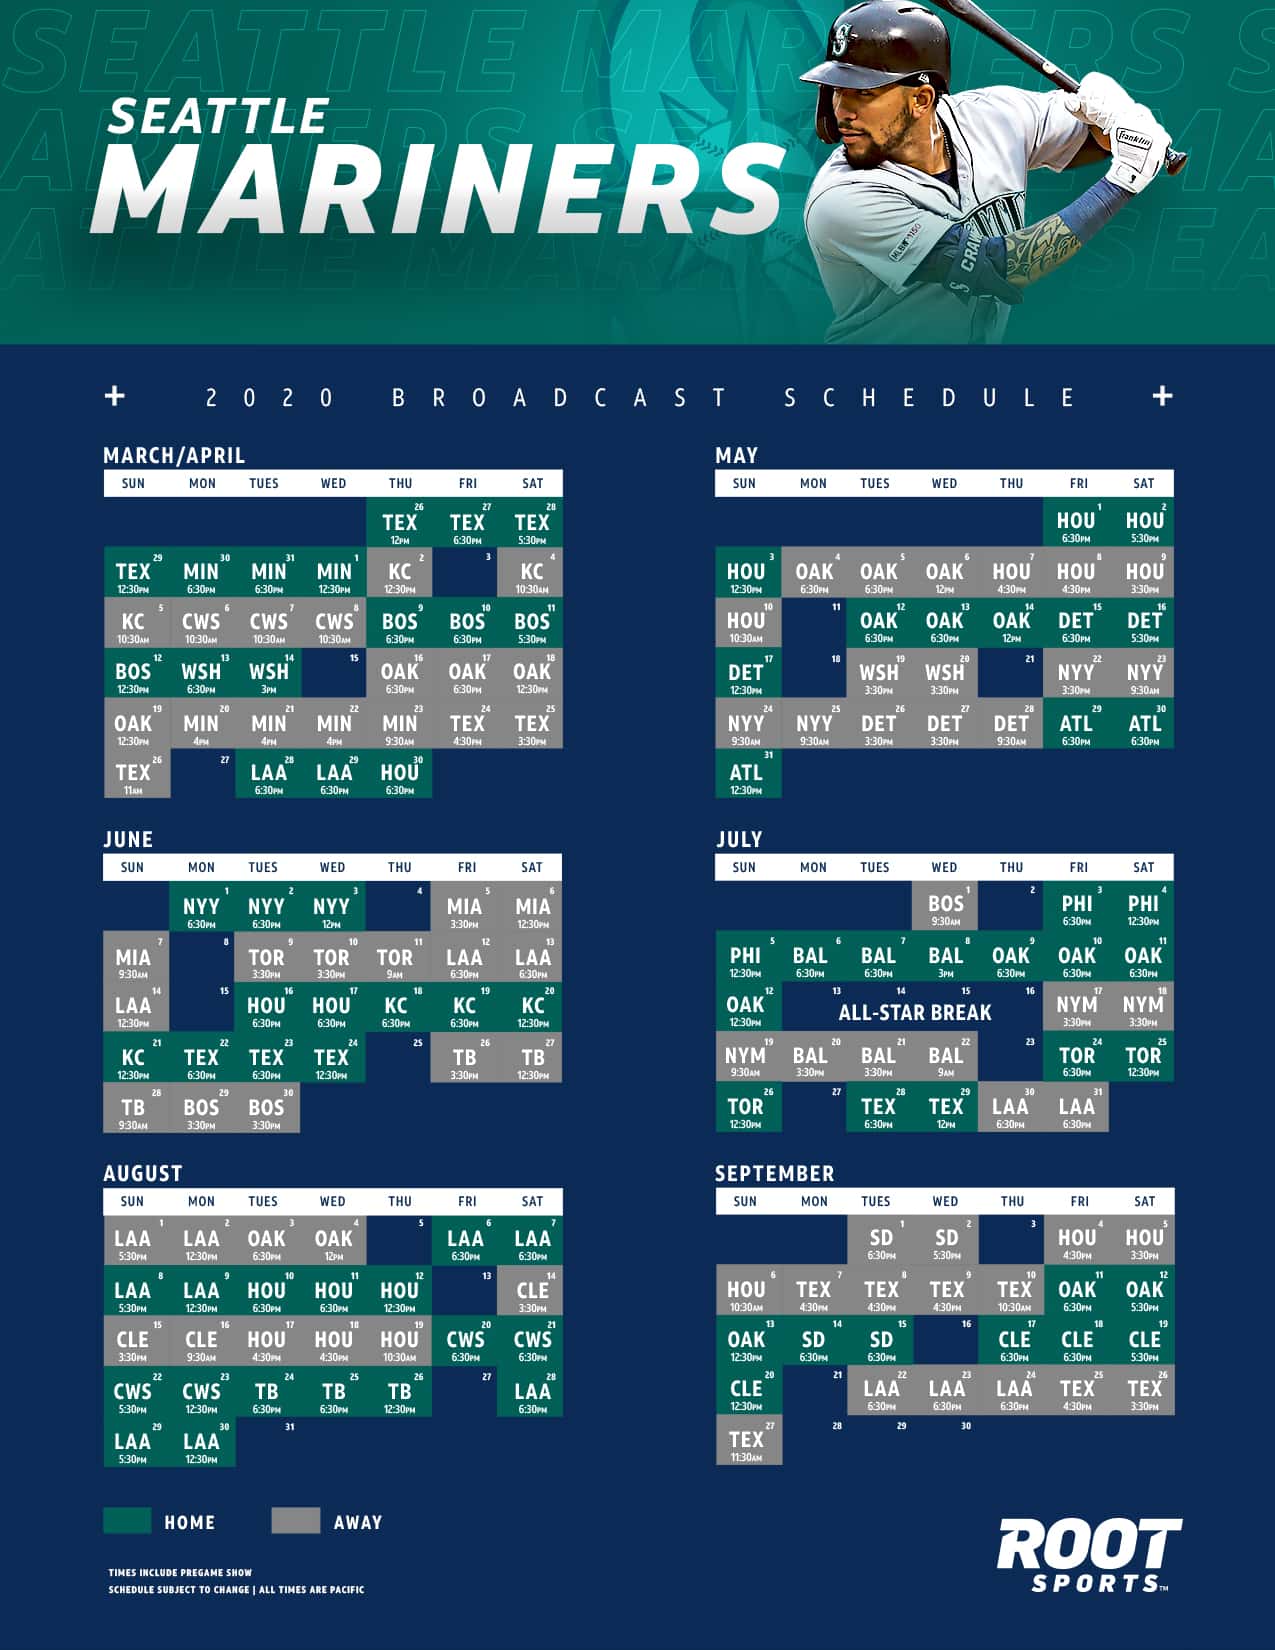 2020 RS NW MARINERS SCHEDULE WEB 